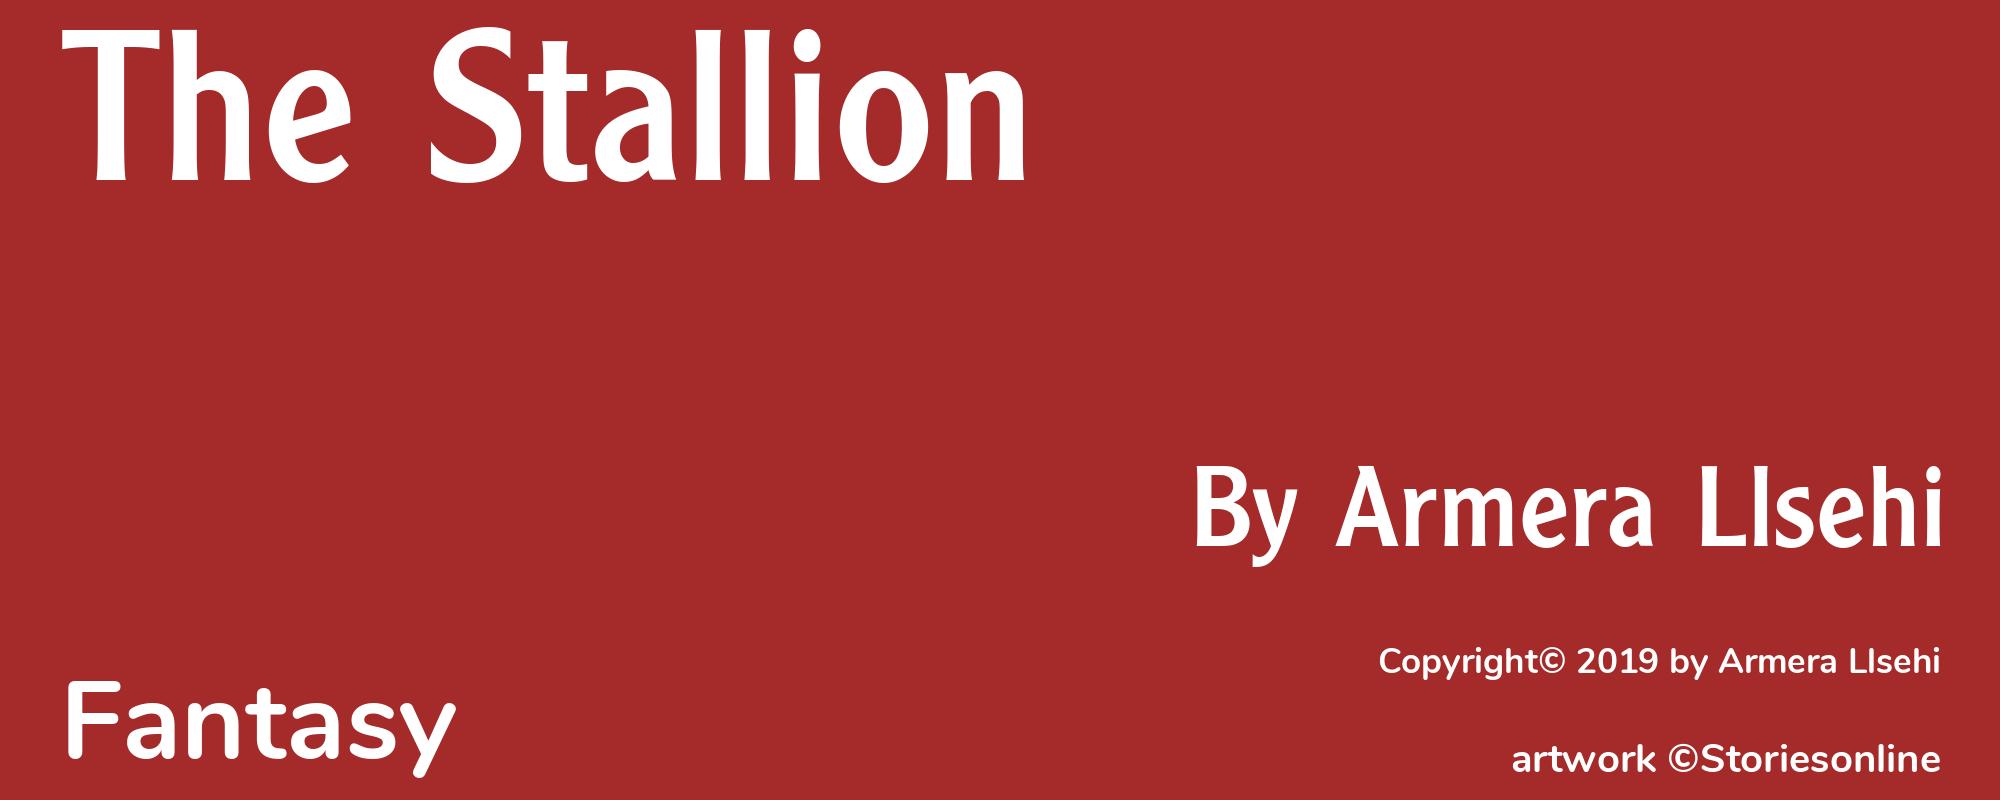 The Stallion - Cover